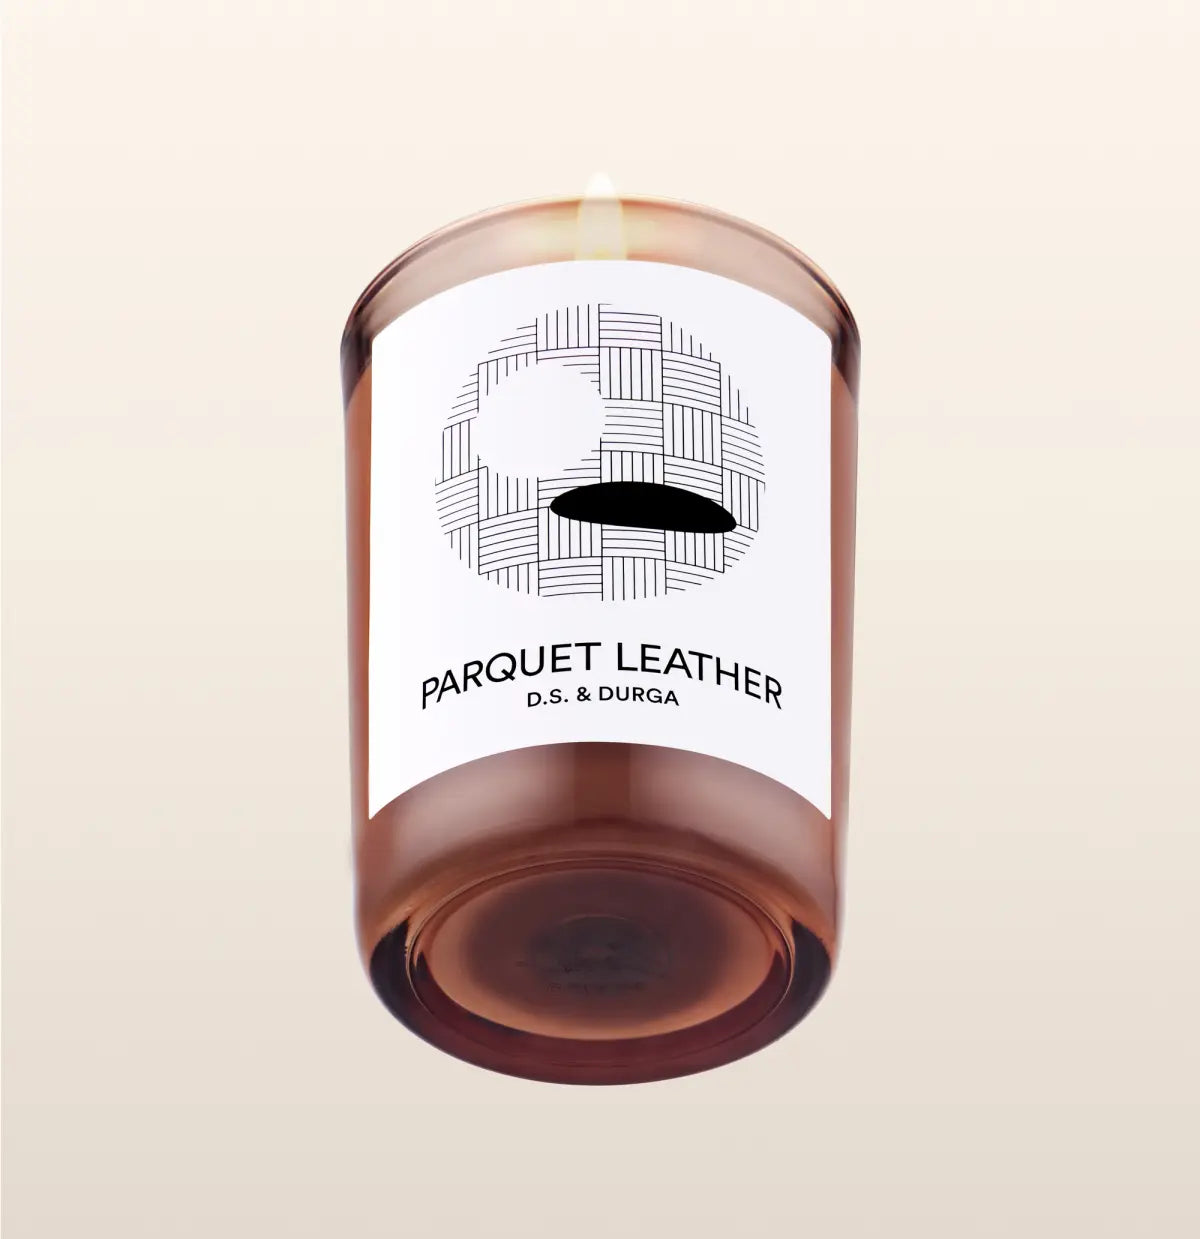 Parquet Leather Candle by D.S. & Durga